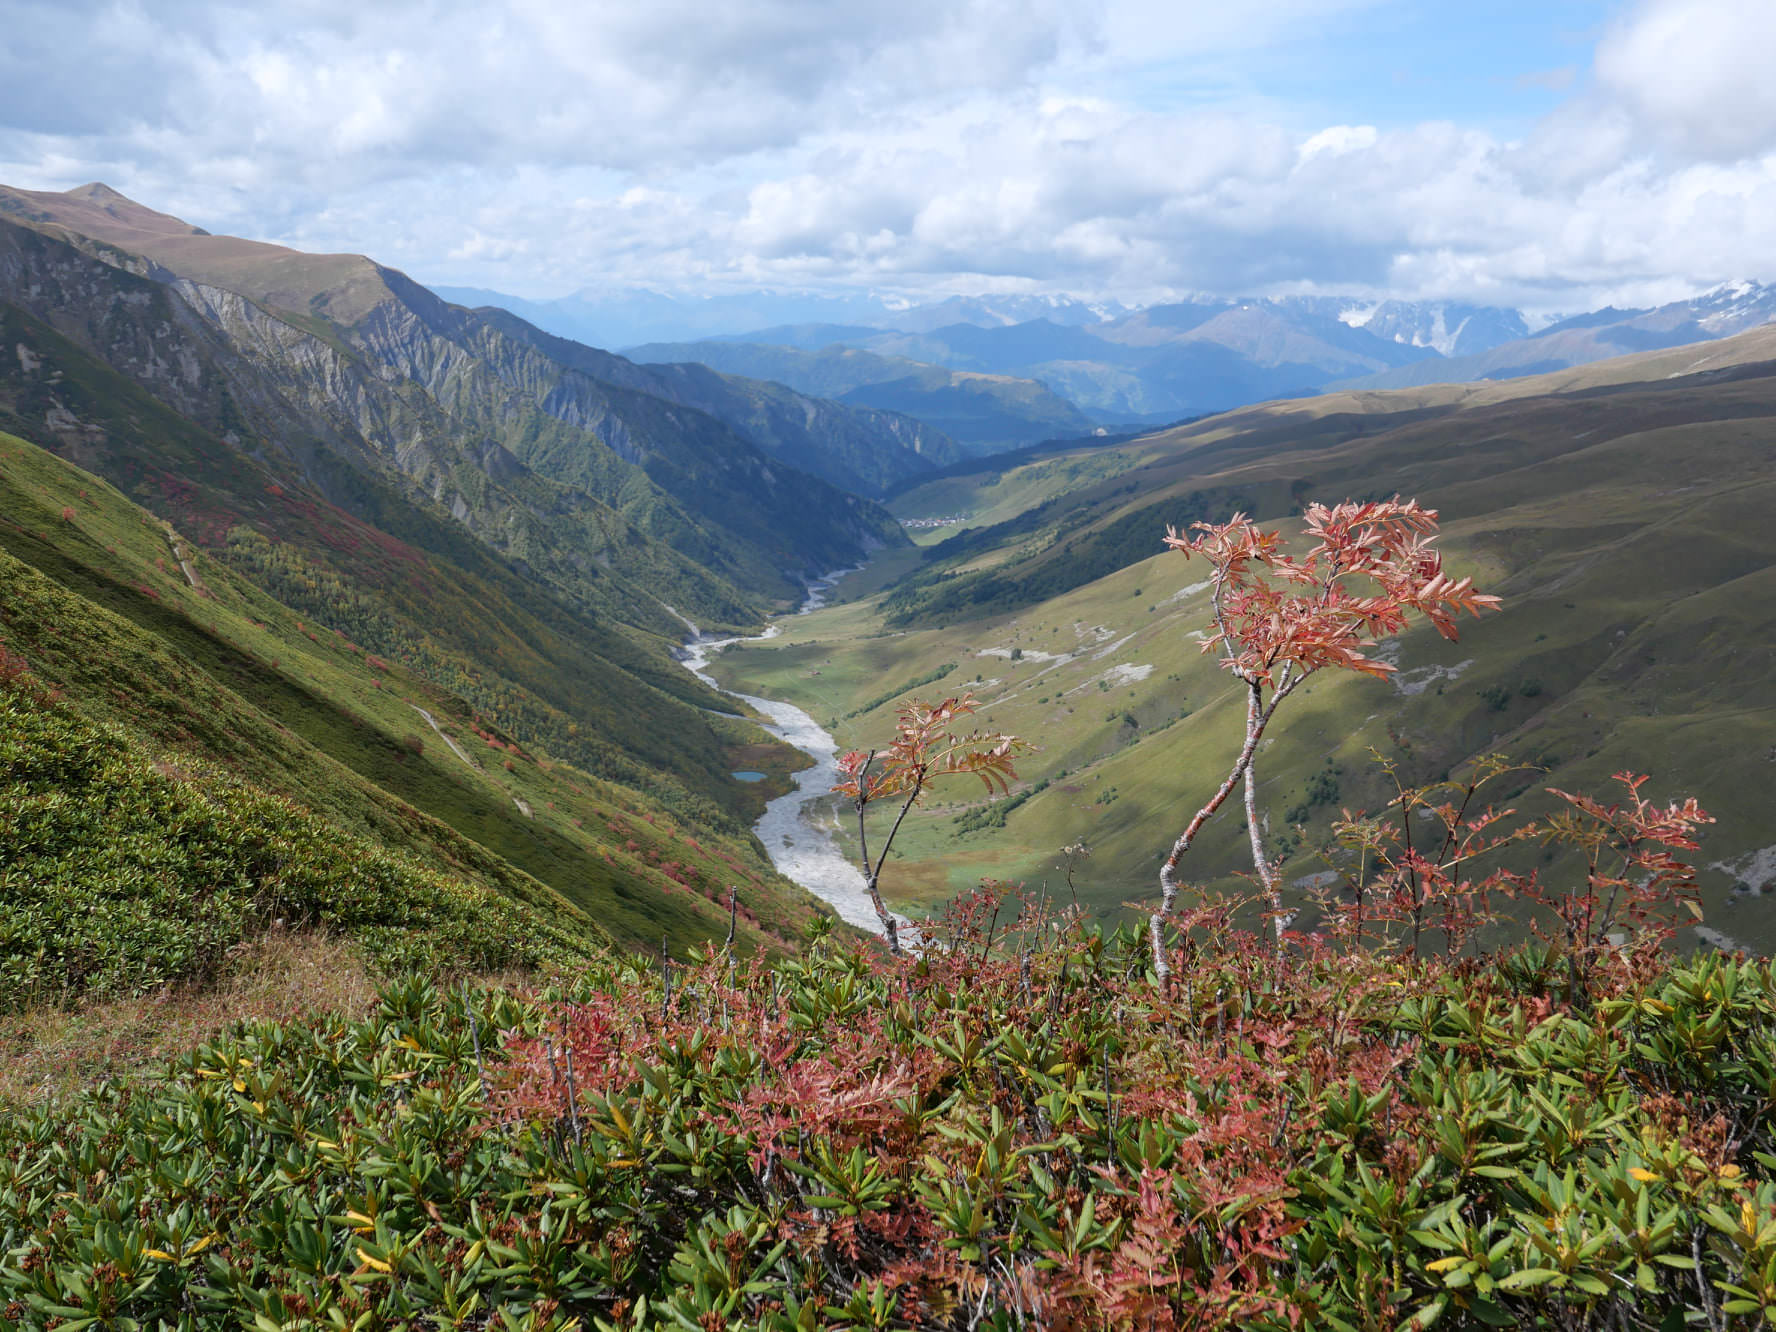 Adischala valley from approach to Rhododendron pass